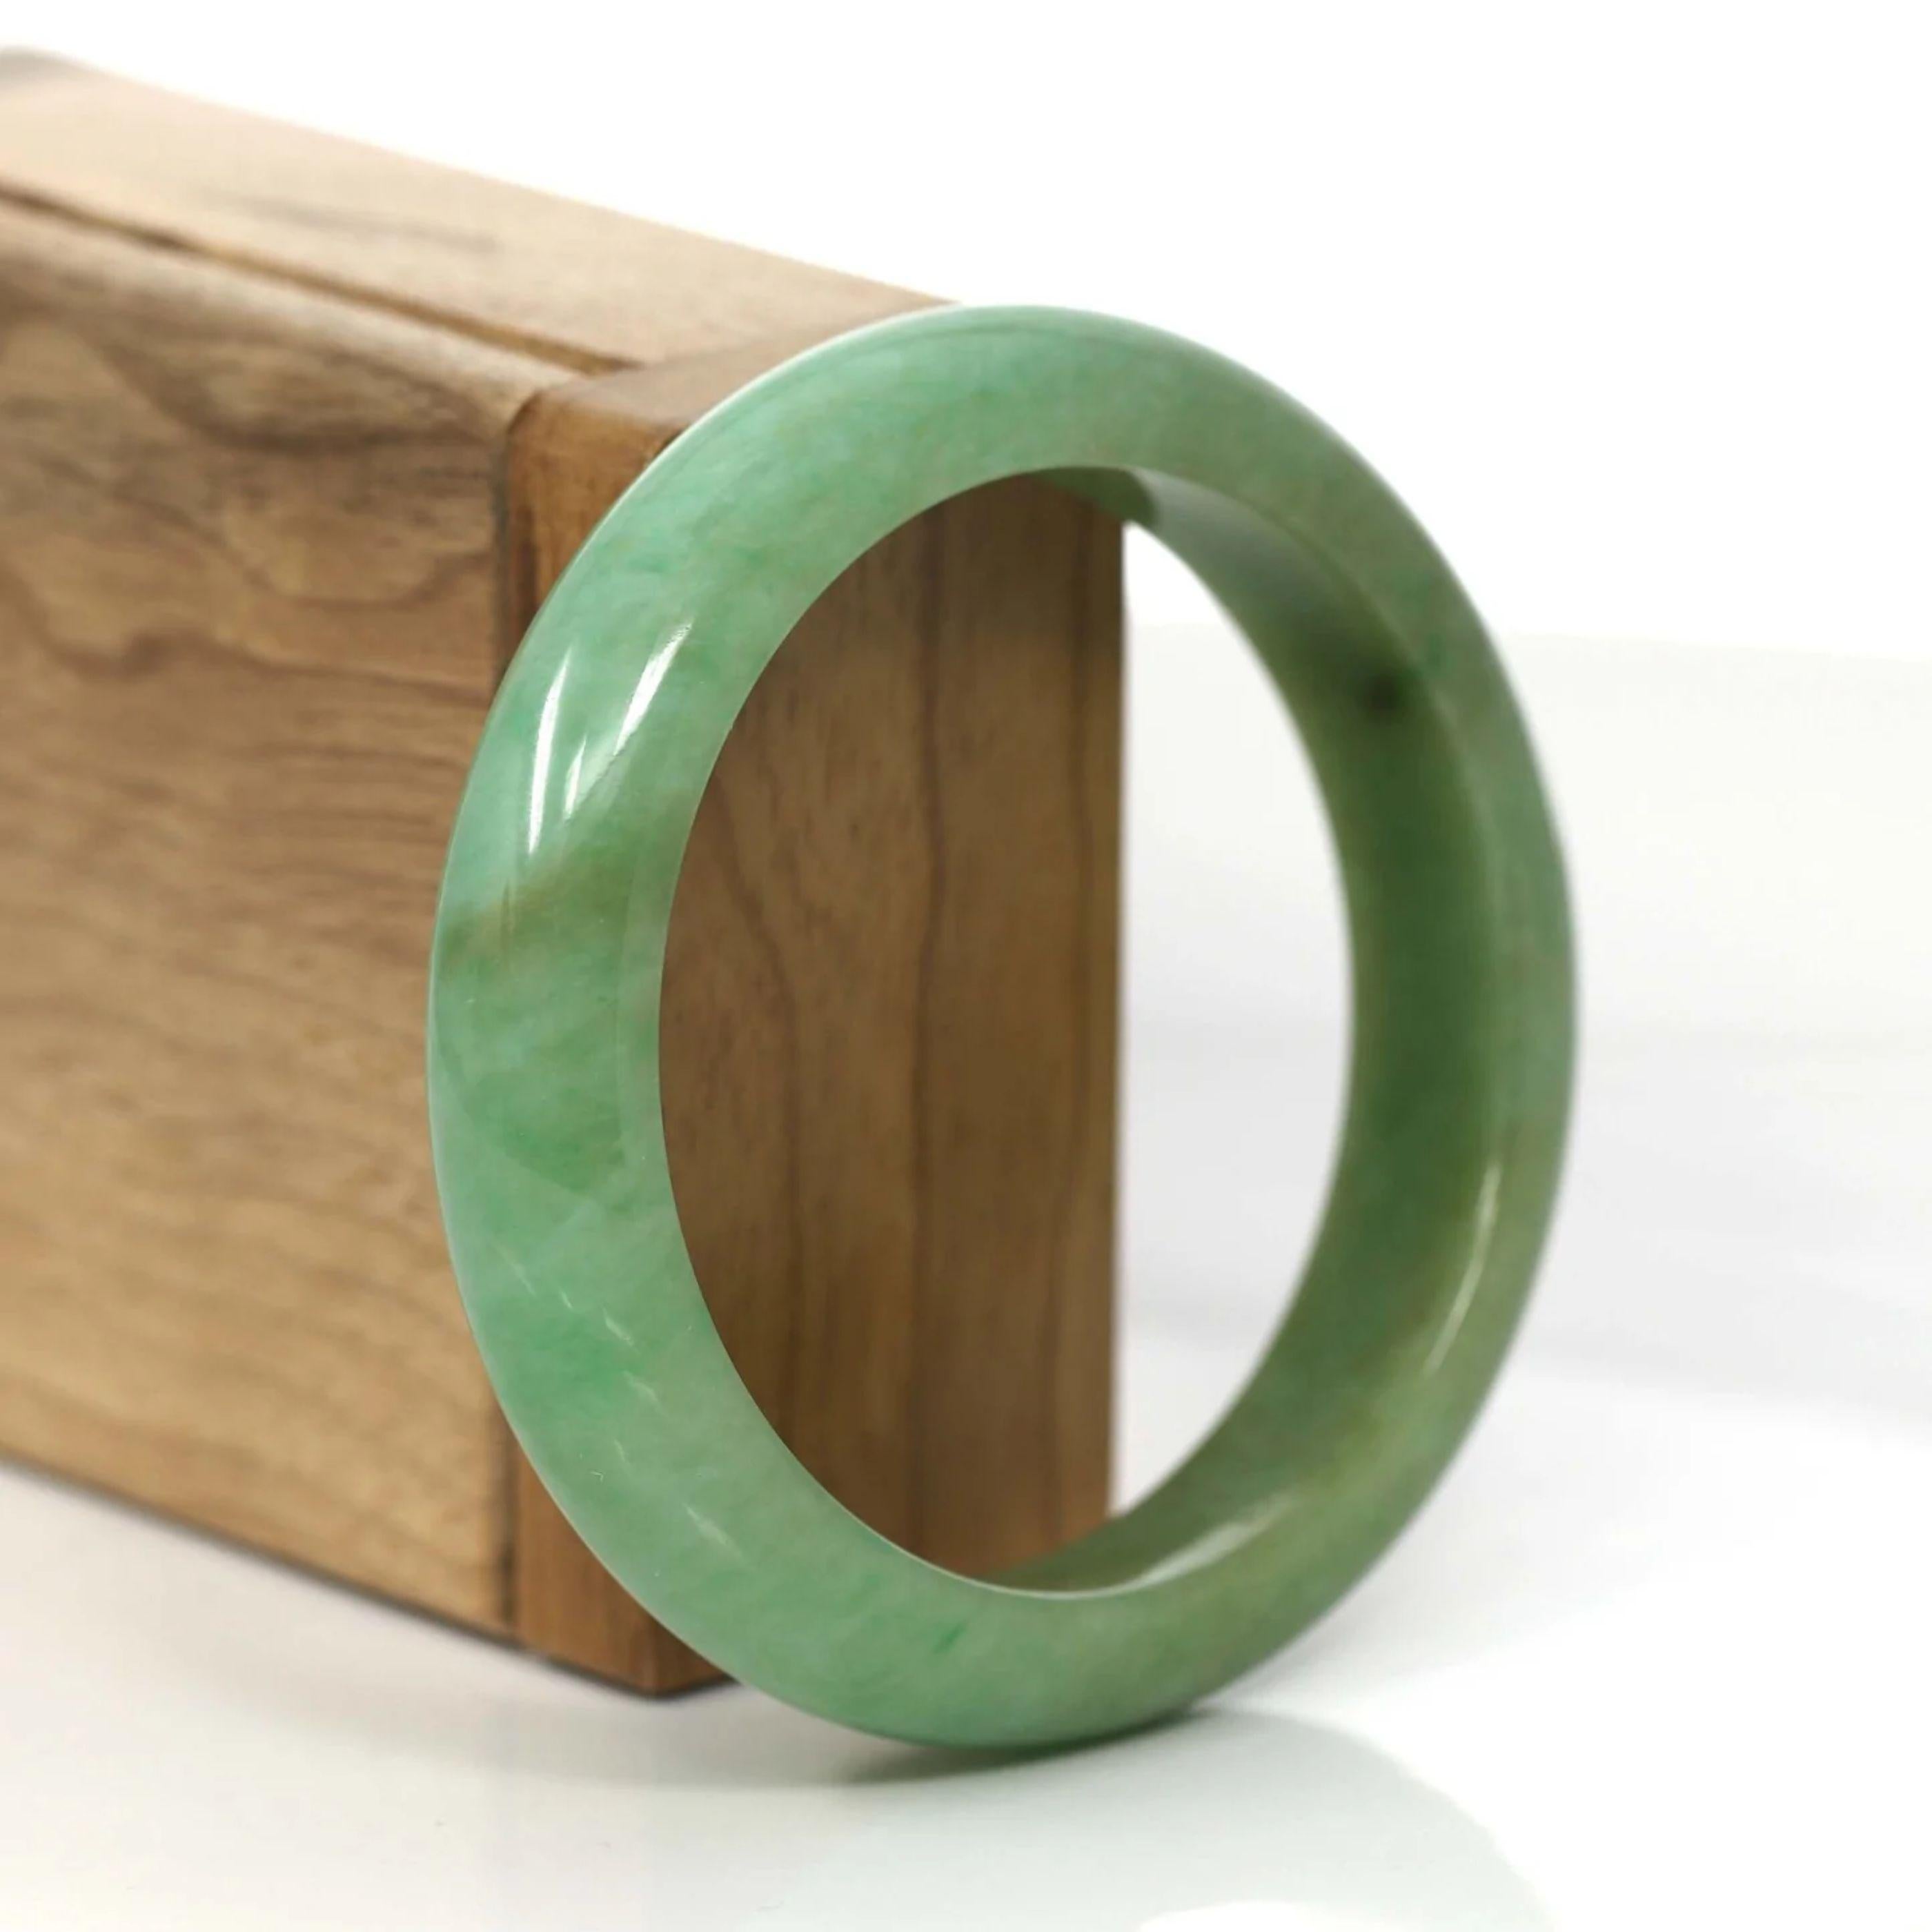 * * DETAILS--- This bangle is made with Burmese yellow-green jadeite jade. This bangle is made with very fine texture from old mine. The jade texture is very smooth, with part of the green color and yellowish.  It's a very unique bangle with a